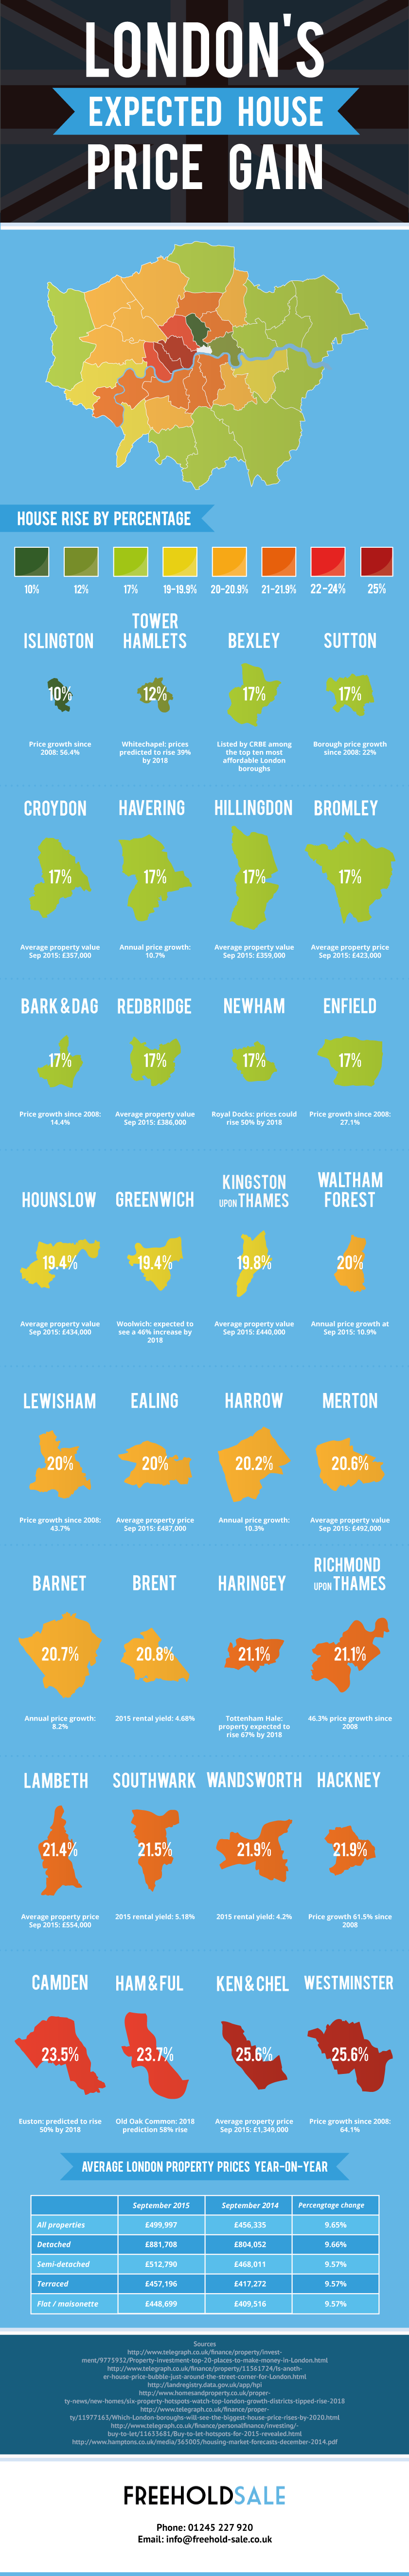 London’s Expected House Price Gain by Freehold Sale